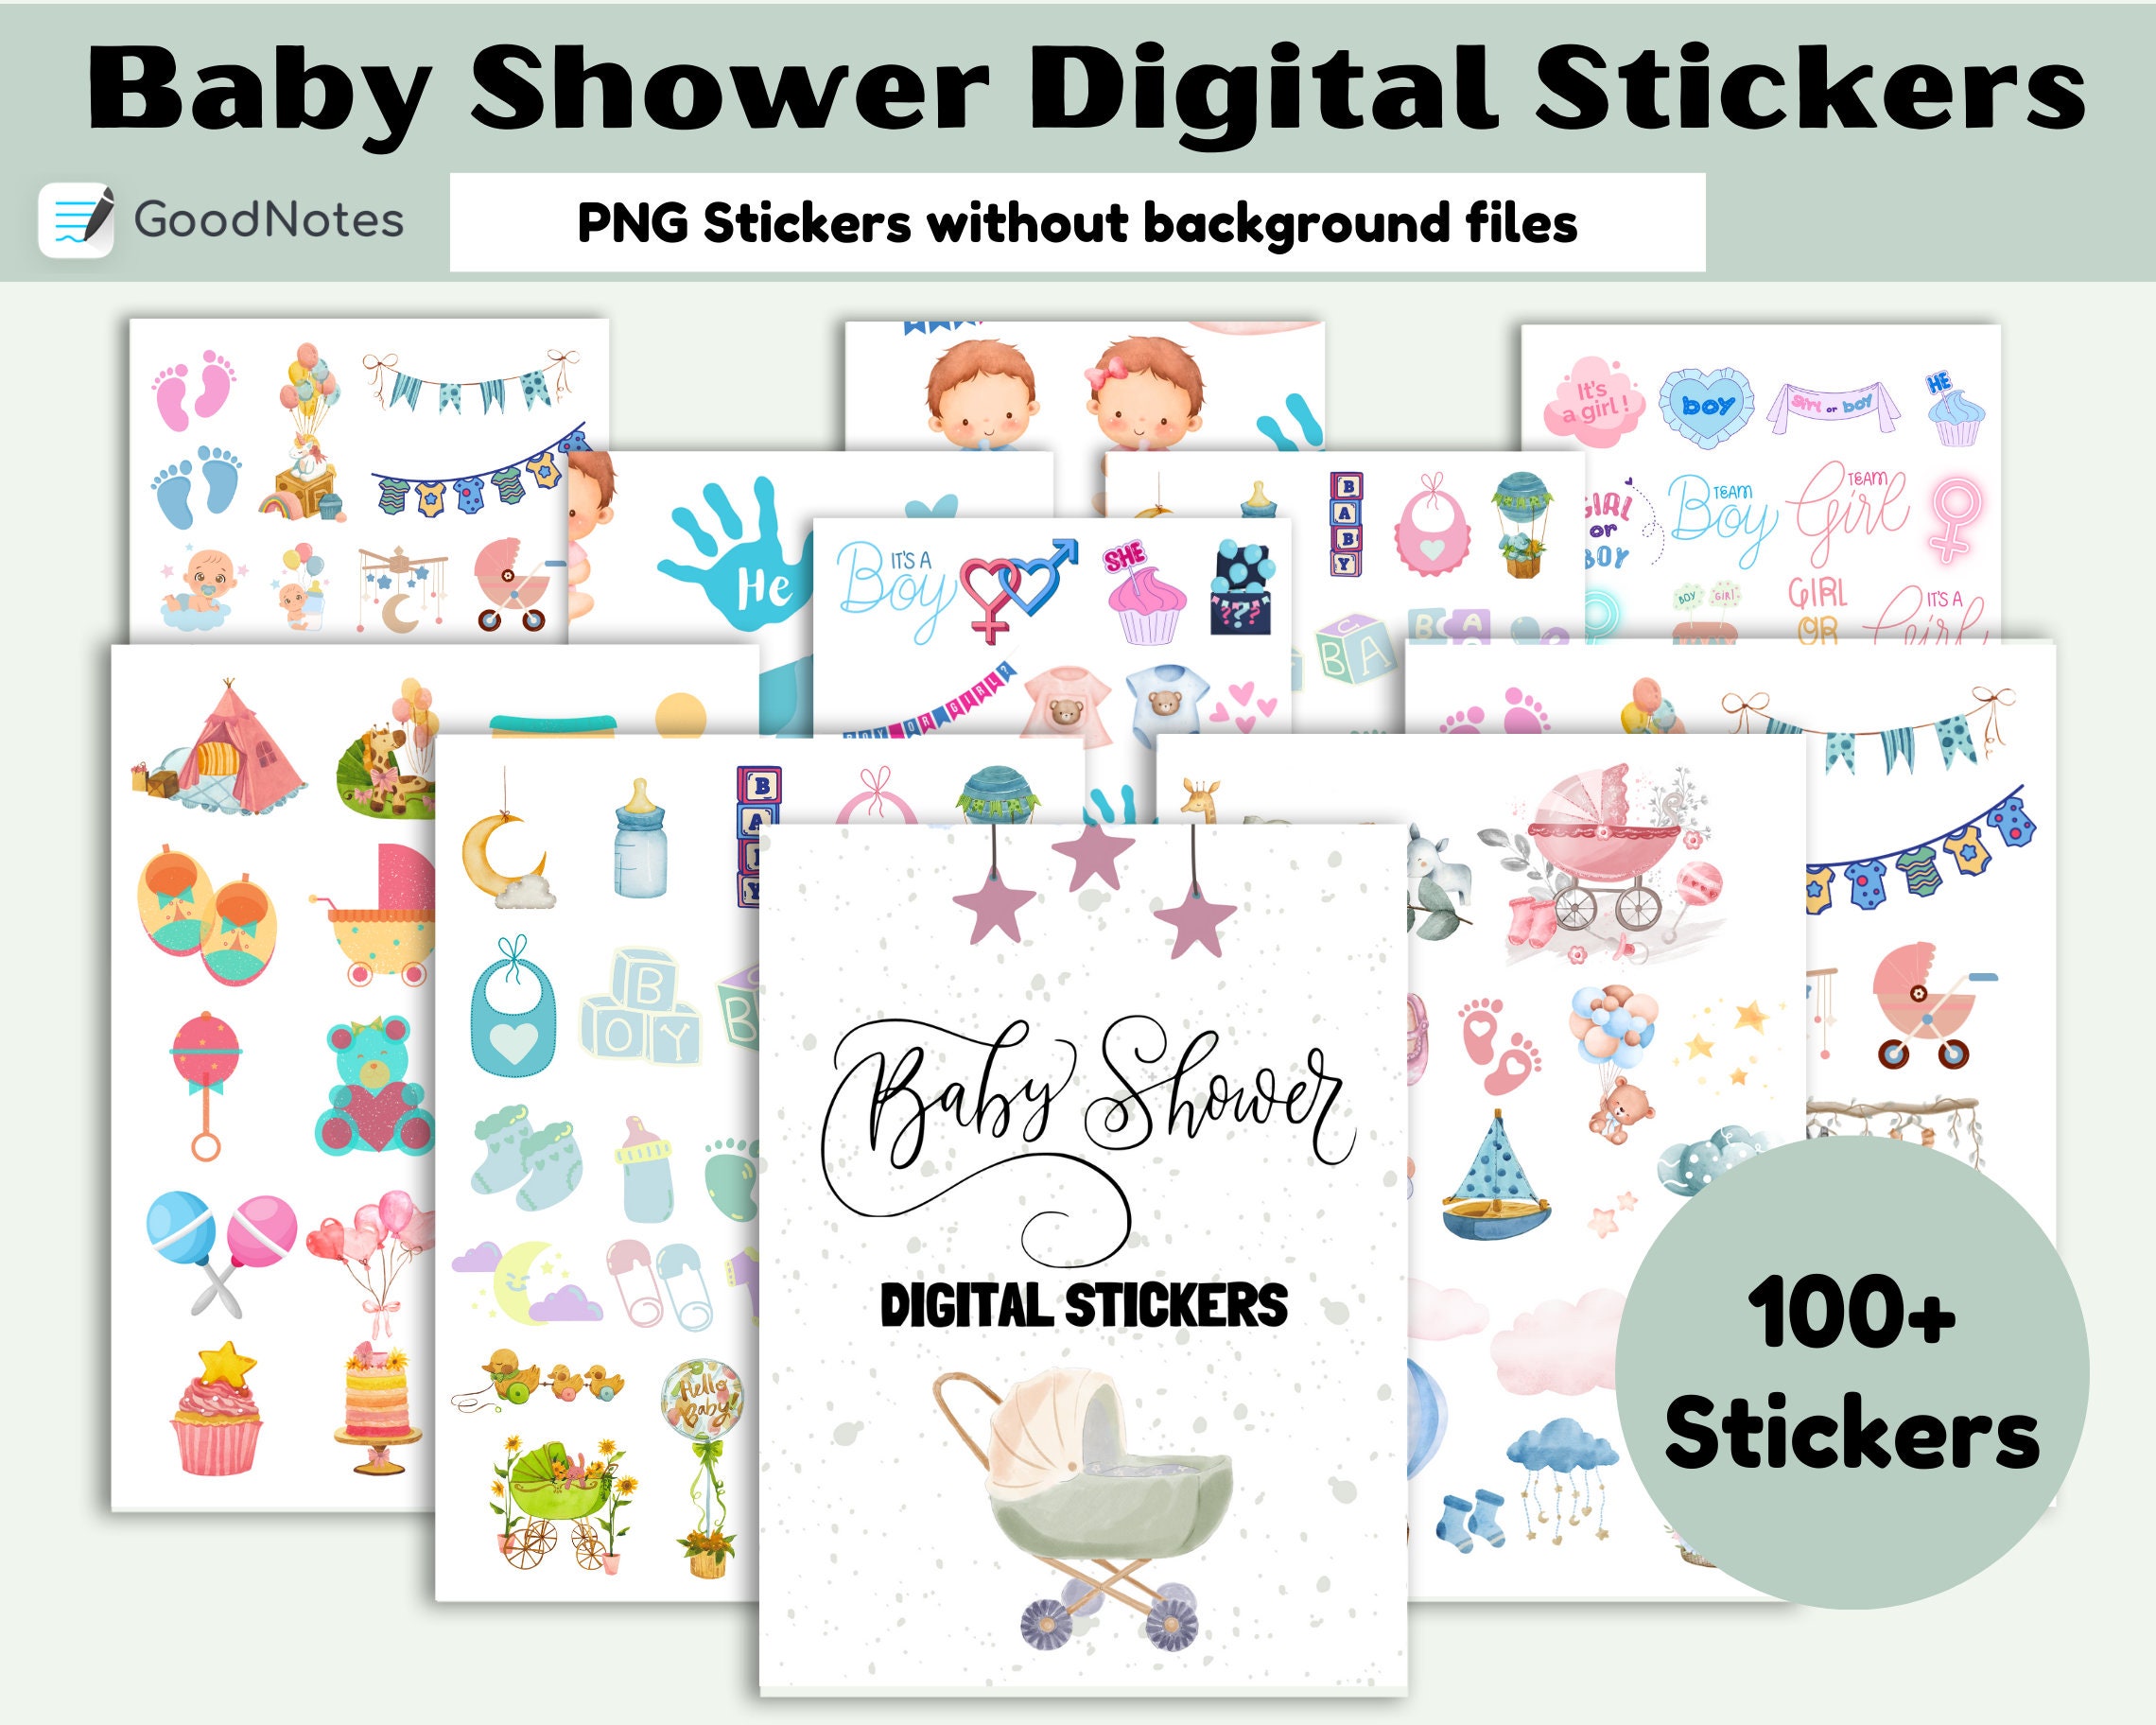 Cute Baby Girl Gems Stickers #8678 :: Baby Stickers